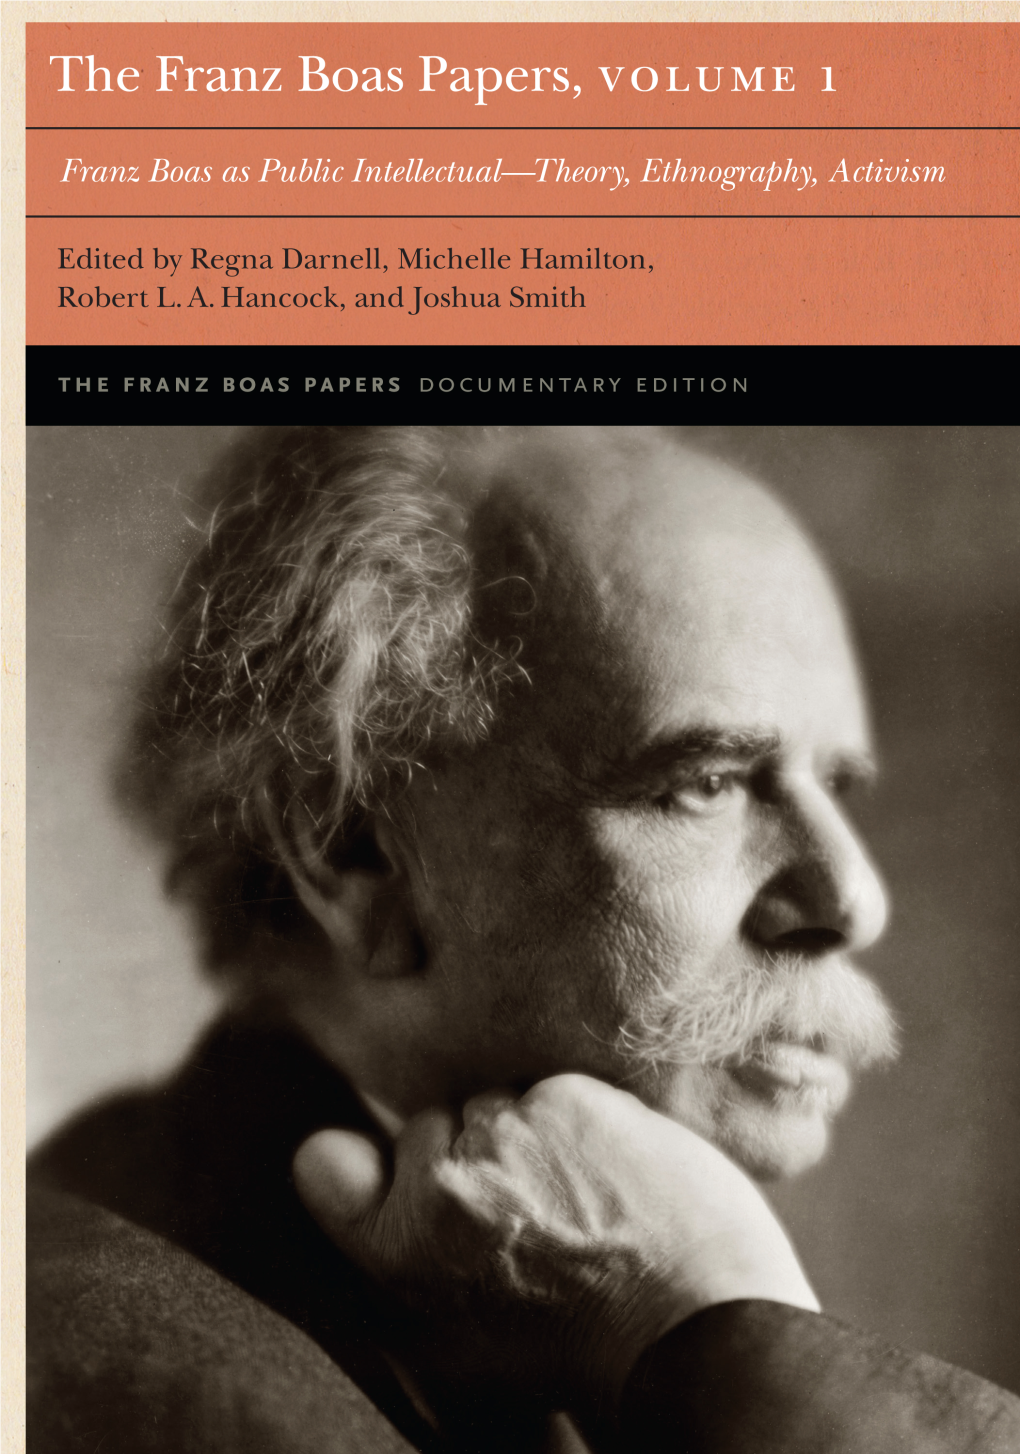 Franz Boas As Public Intellectual—Theory, Ethnography, Activism